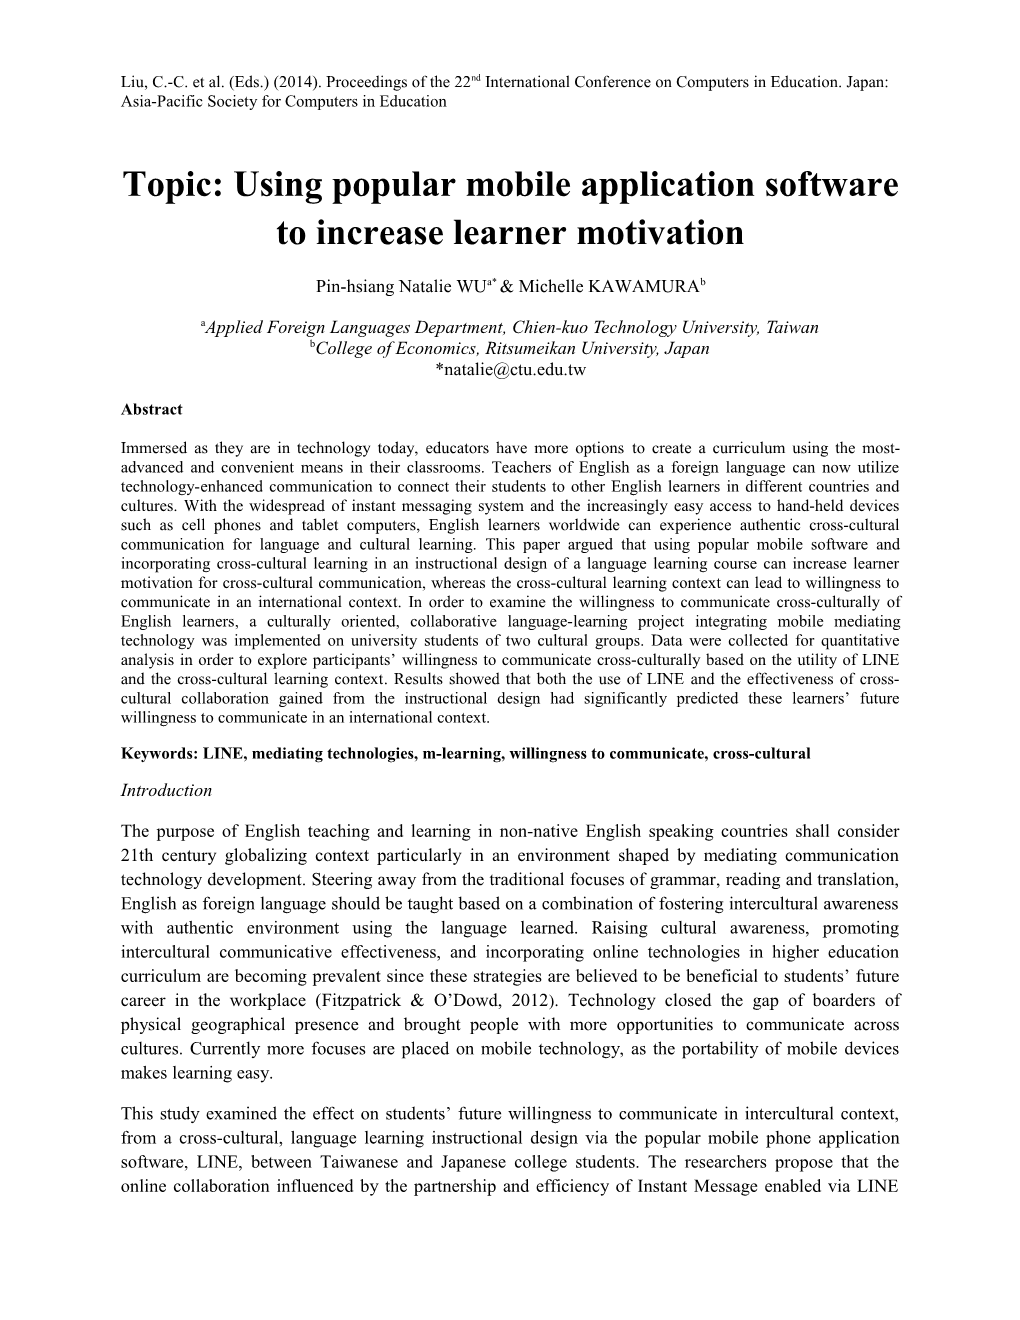 Topic: Using Popular Mobile Application Software to Increase Learner Motivation